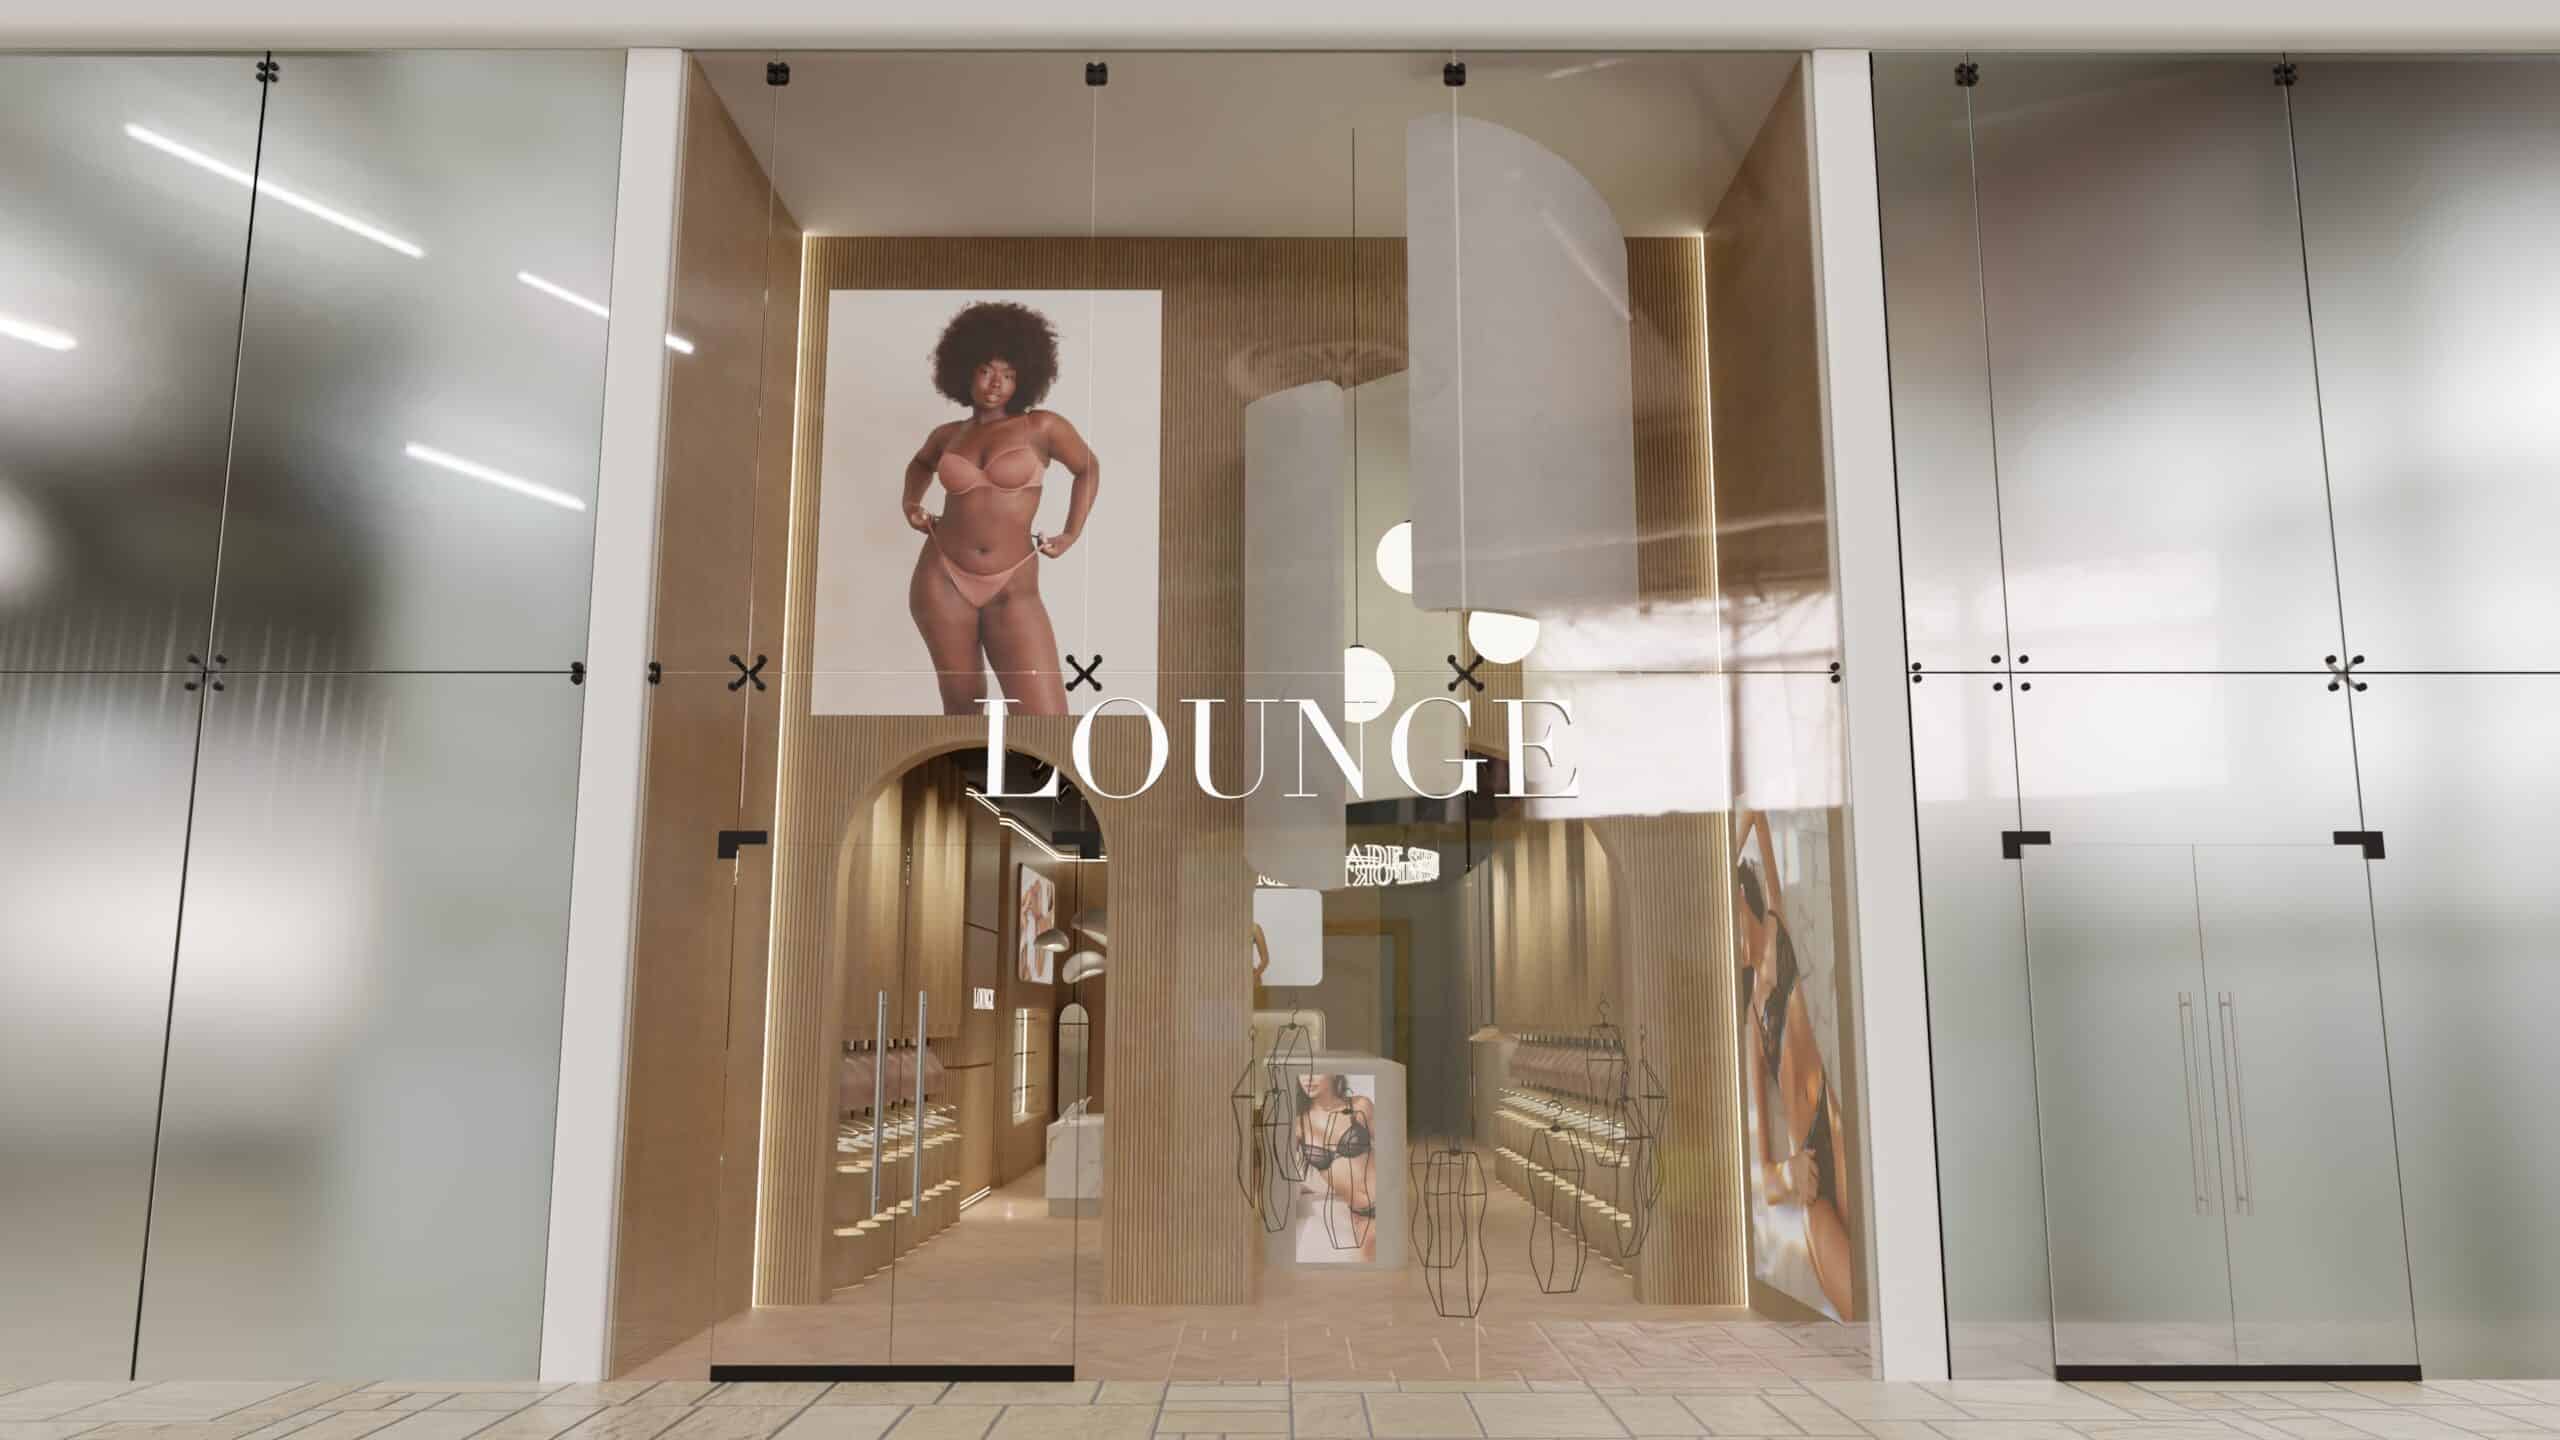 Lounge Underwear to launch first permanent physical store after pop-up  success - InternetRetailing